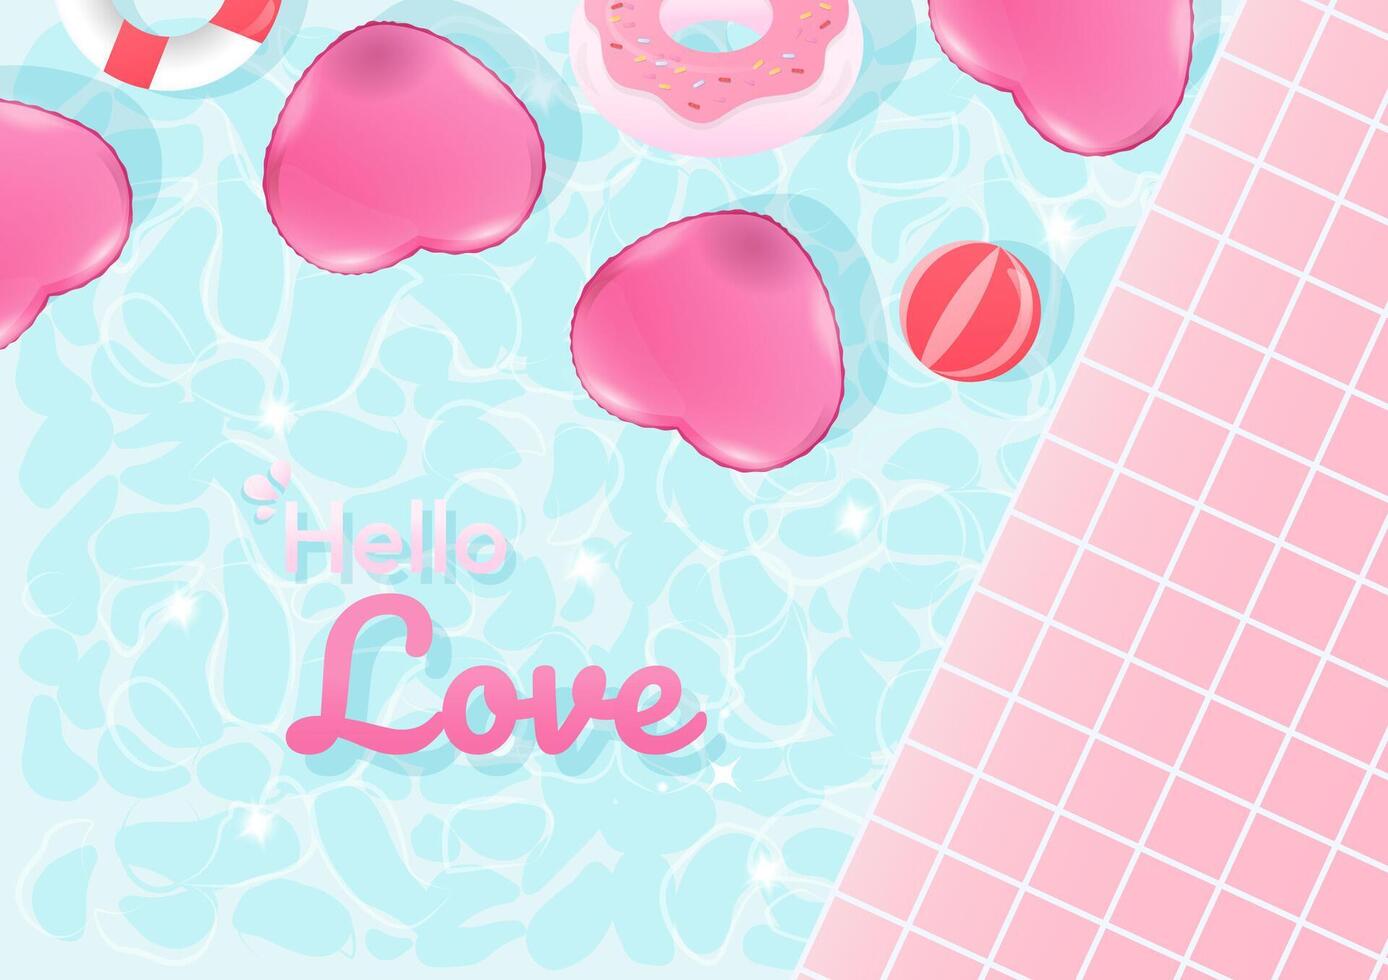 Pink heart balloon in the pool background vector